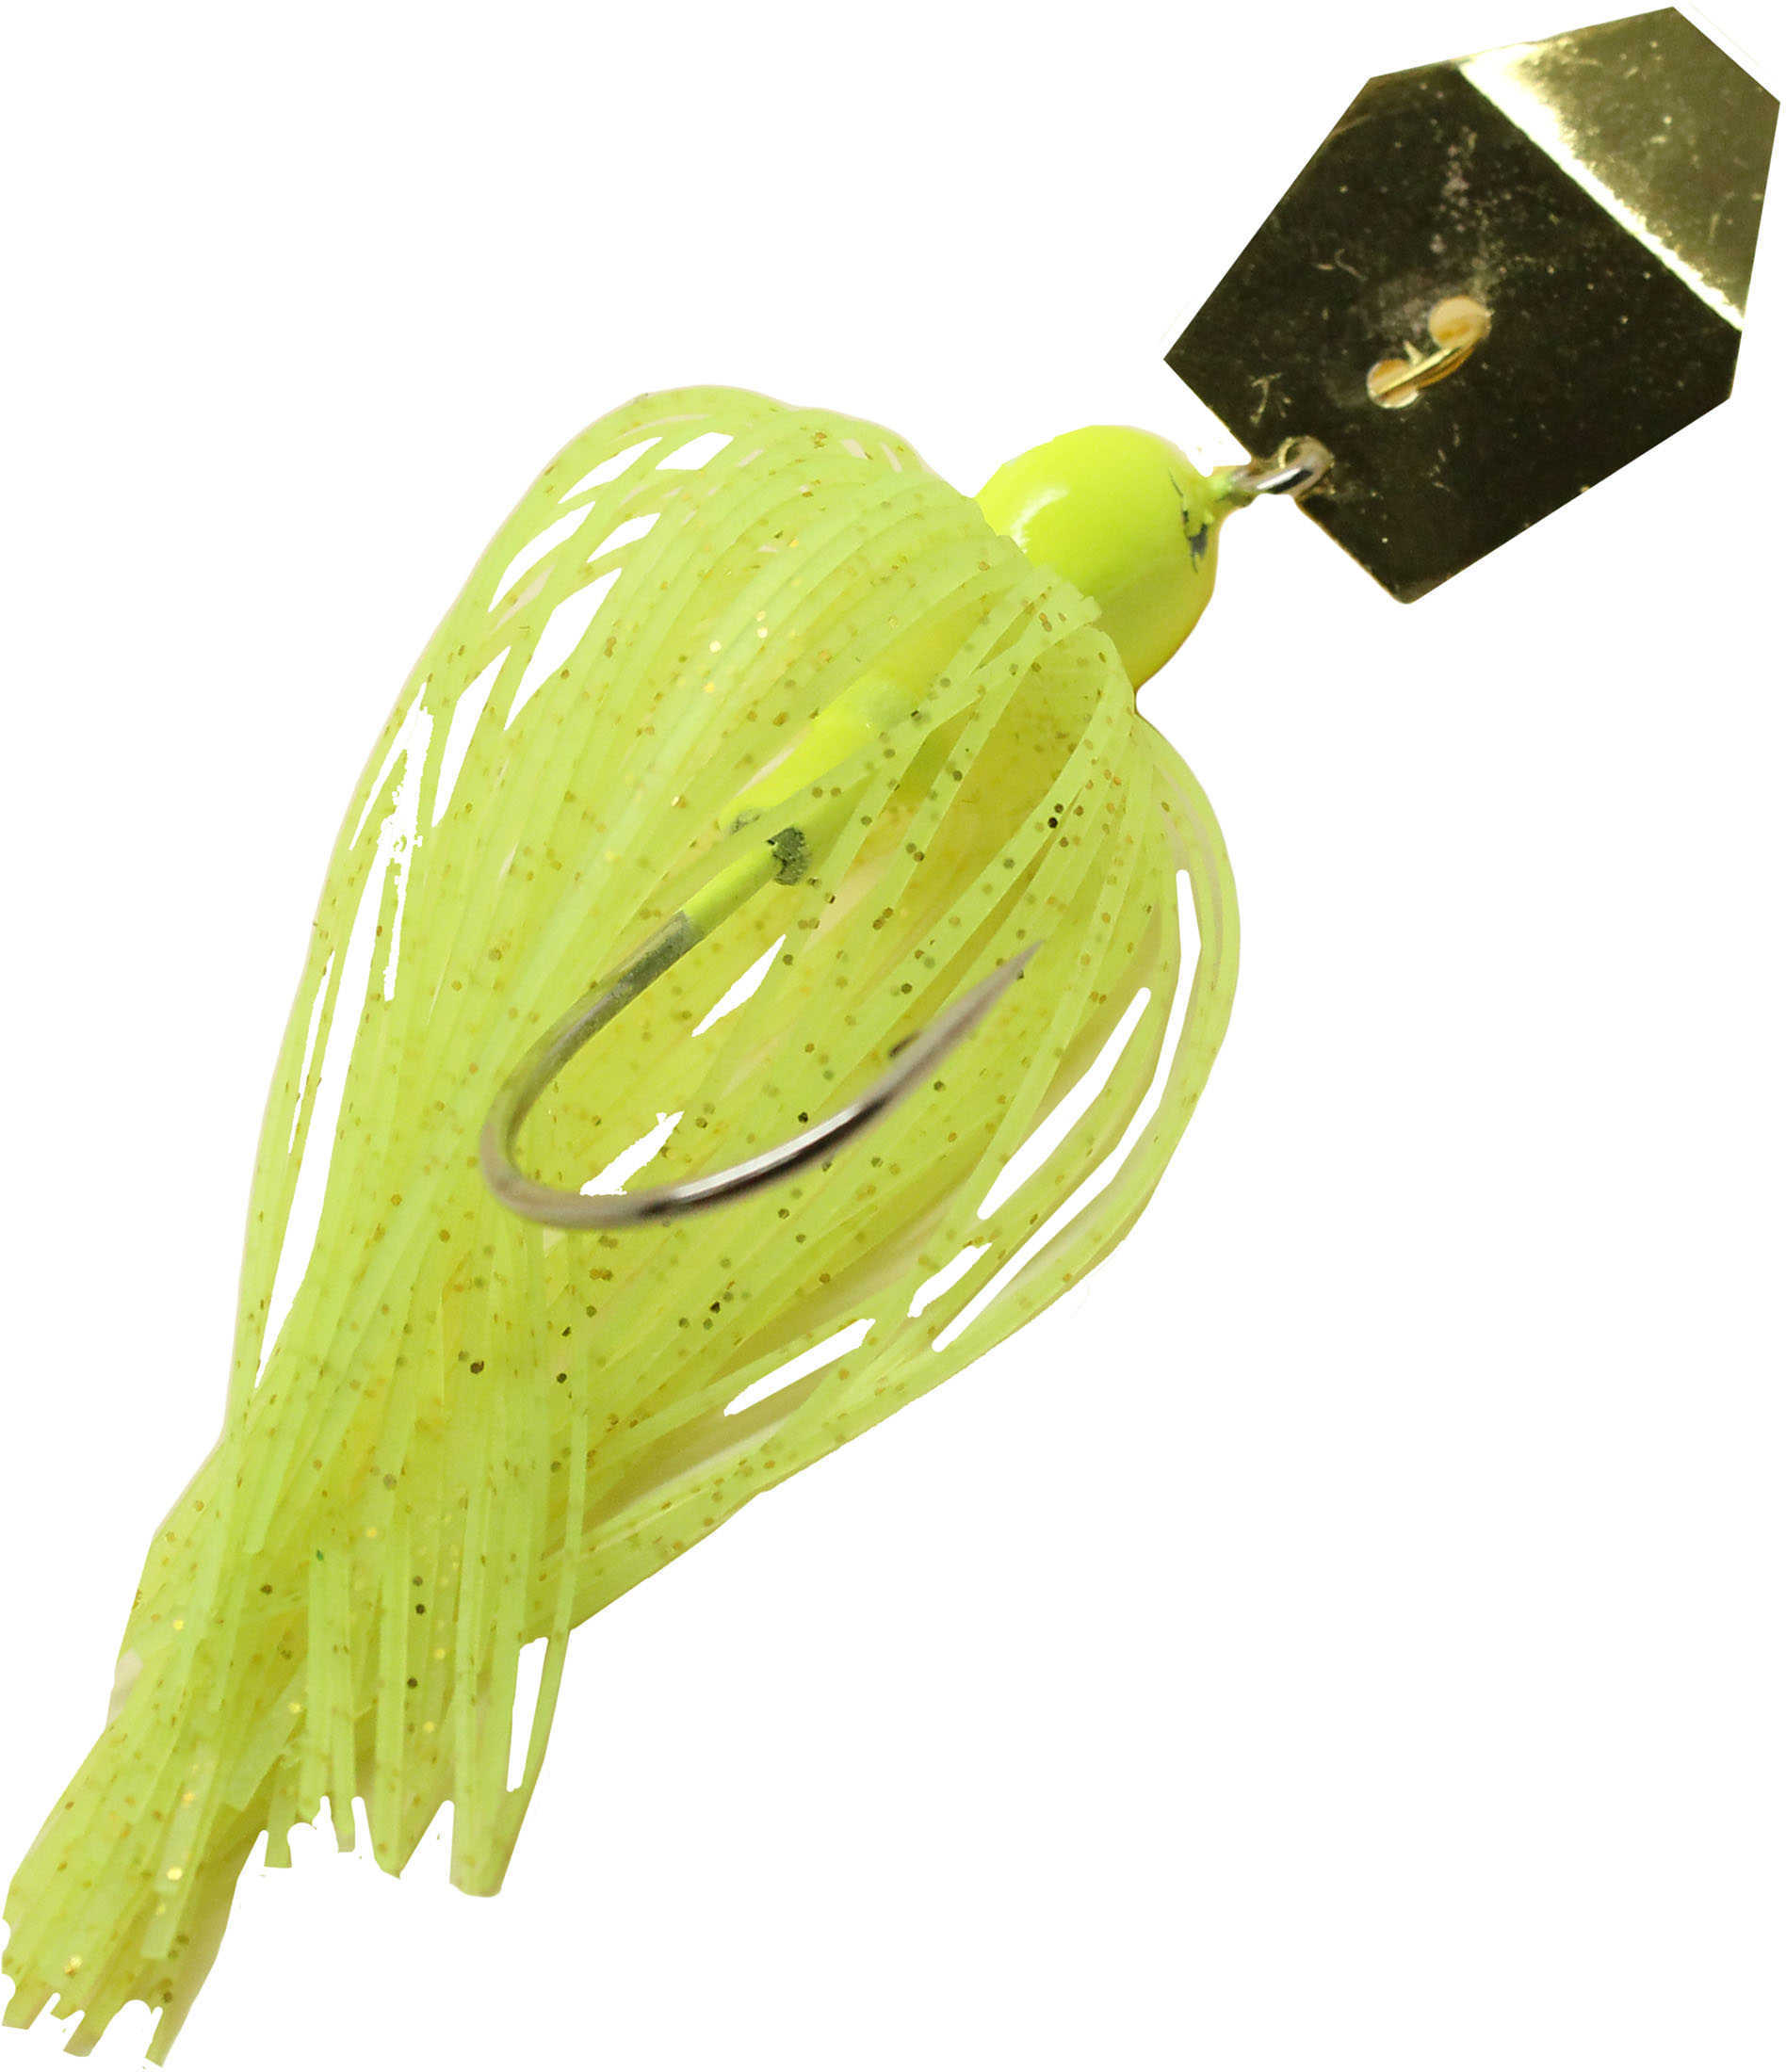 Z-Man / Chatterbait Bait 1/2 Ounce 5/0 Hook Size Chartreuse Lure Md: CB12-17